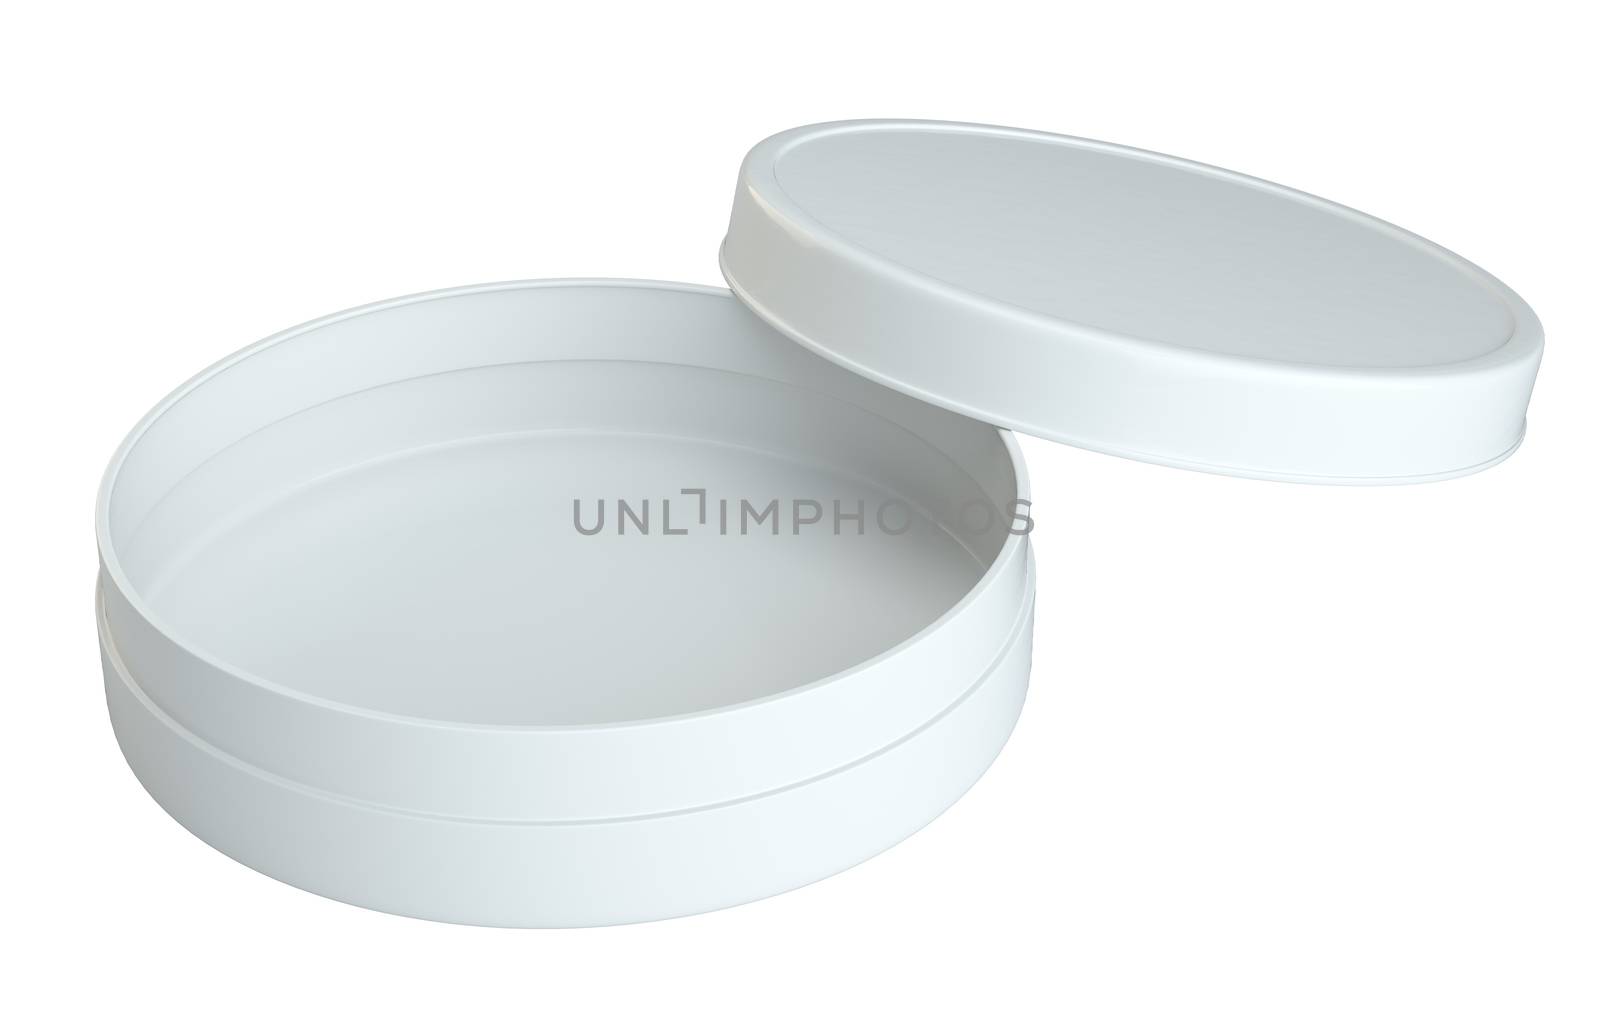 Product Packing. Cream White Opened Empty Can. Isolated On White Background. For Your Design. 3D Illustration